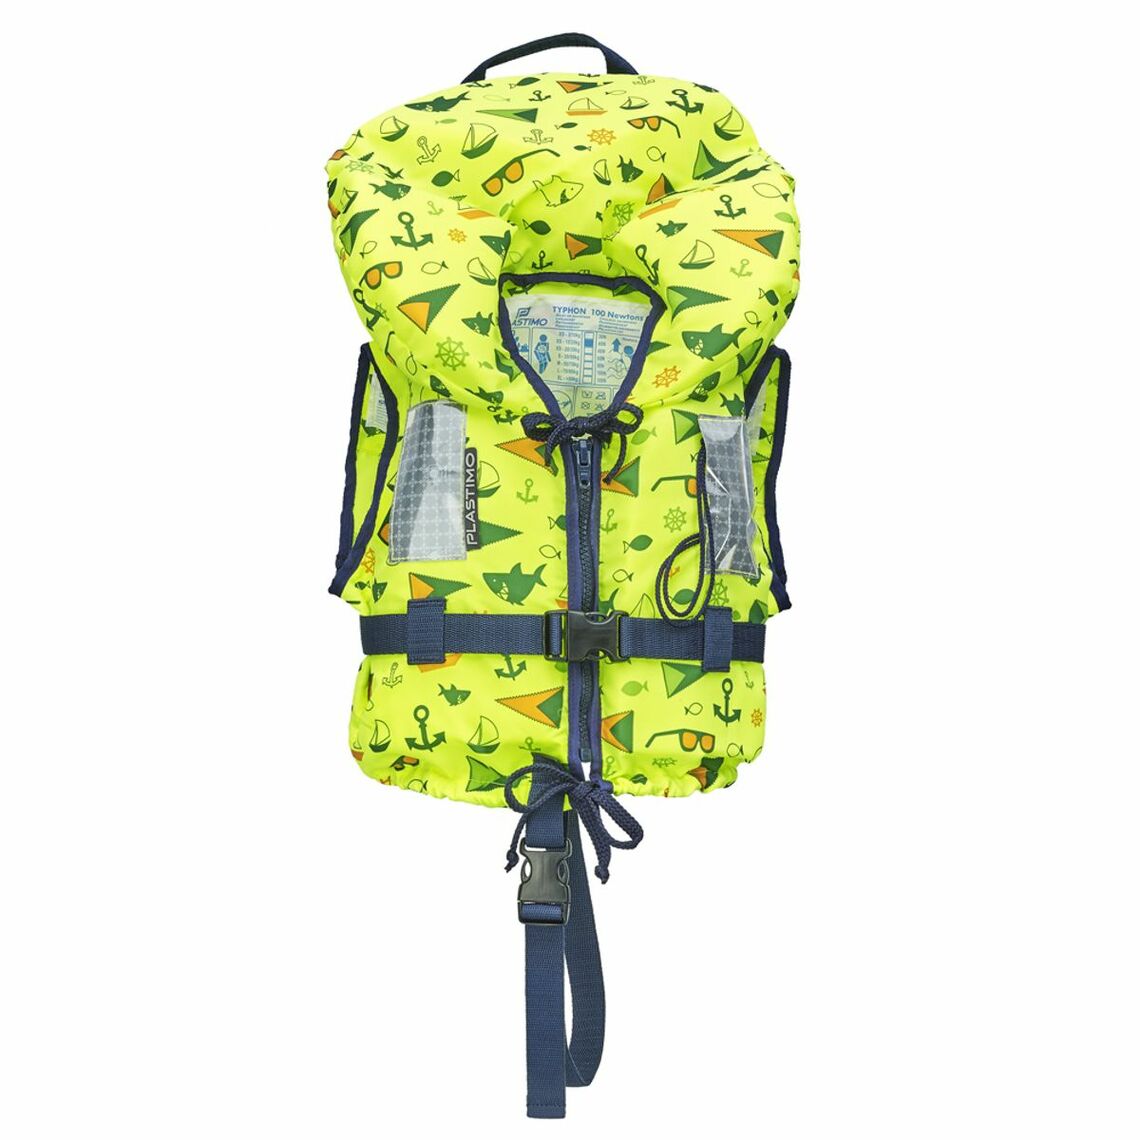 Lifejacket Typhoon Junior For 3 -10 Kg Age Baby/Toddler Lime Yellow 1-2 Years With Zip Adjustable Waist Belt